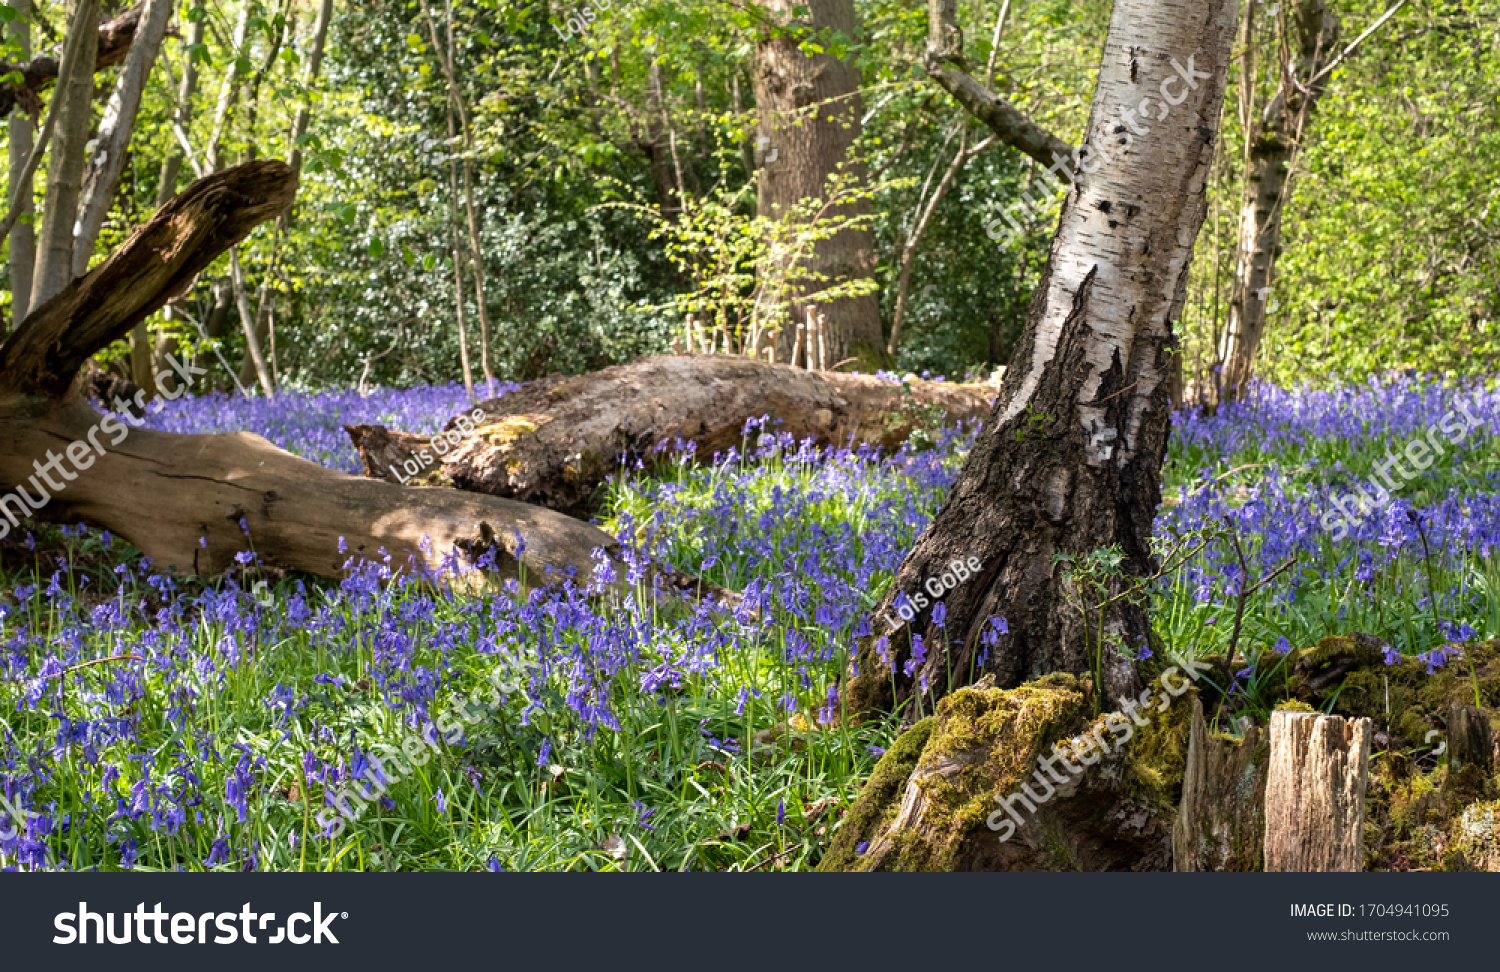 Carpet of bluebells in woodland spring, photographed at Pear Wood next to Stanmore Country Park in Stanmore, Middlesex, UK #1704941095